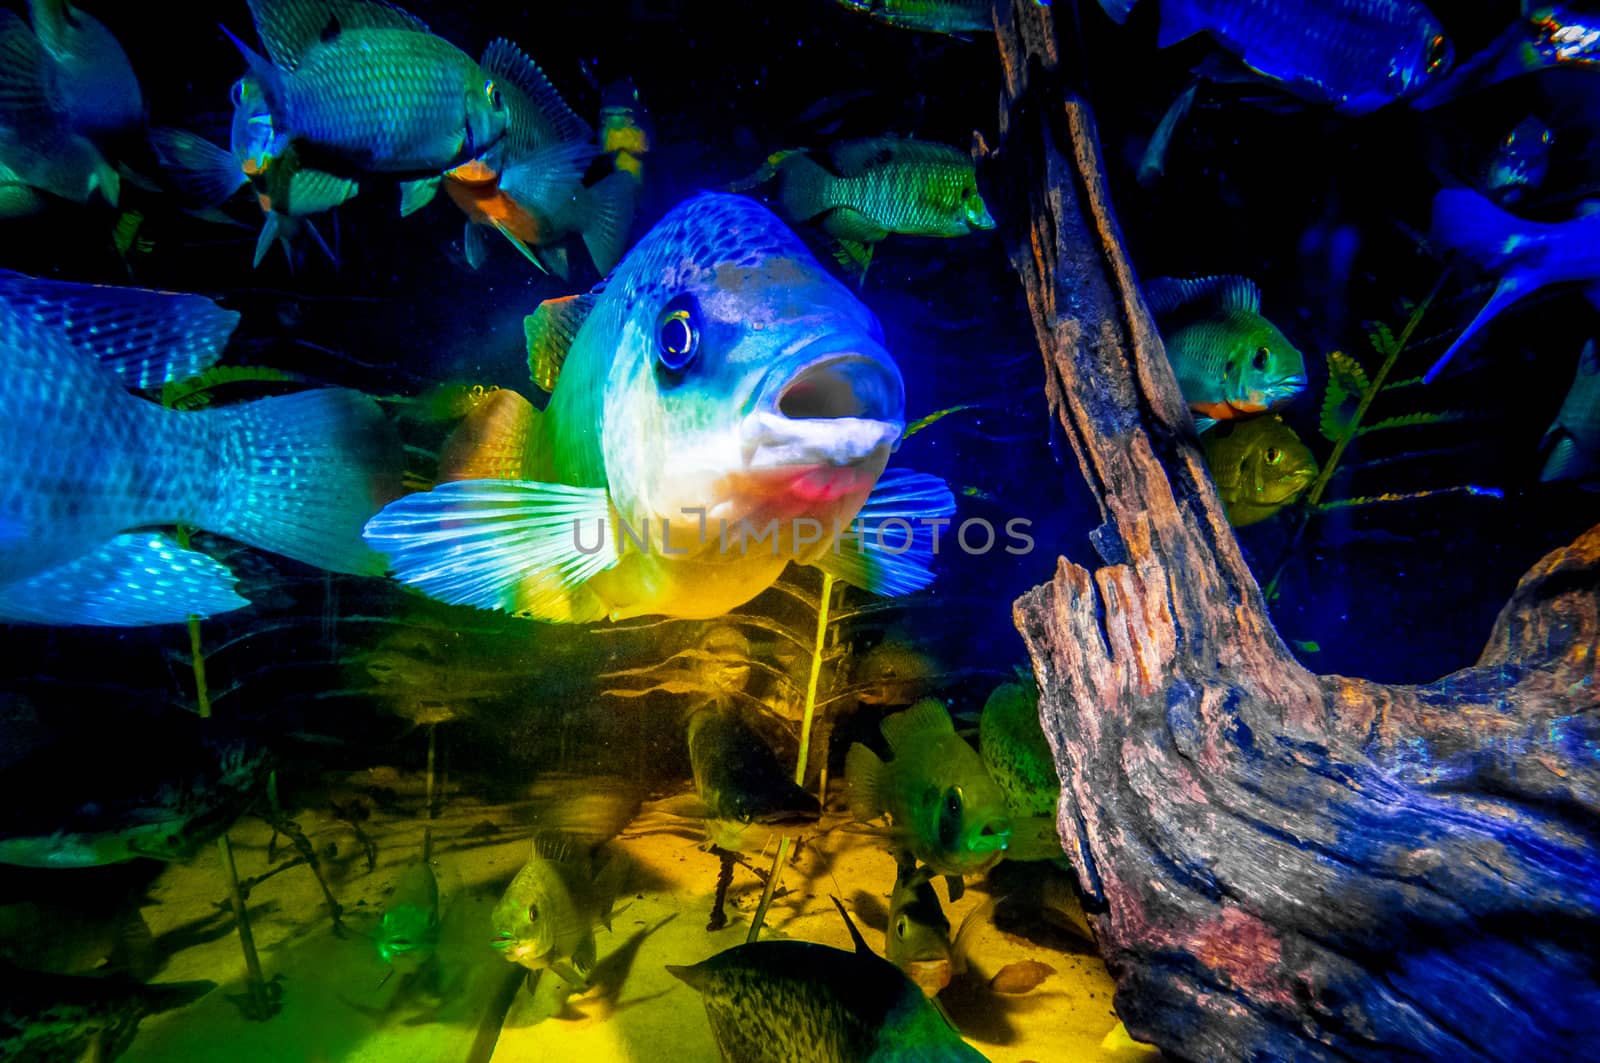 A talapia fish looks towards the camera from inside a fish tank filled with different types of fish found in the Okavango Delta.